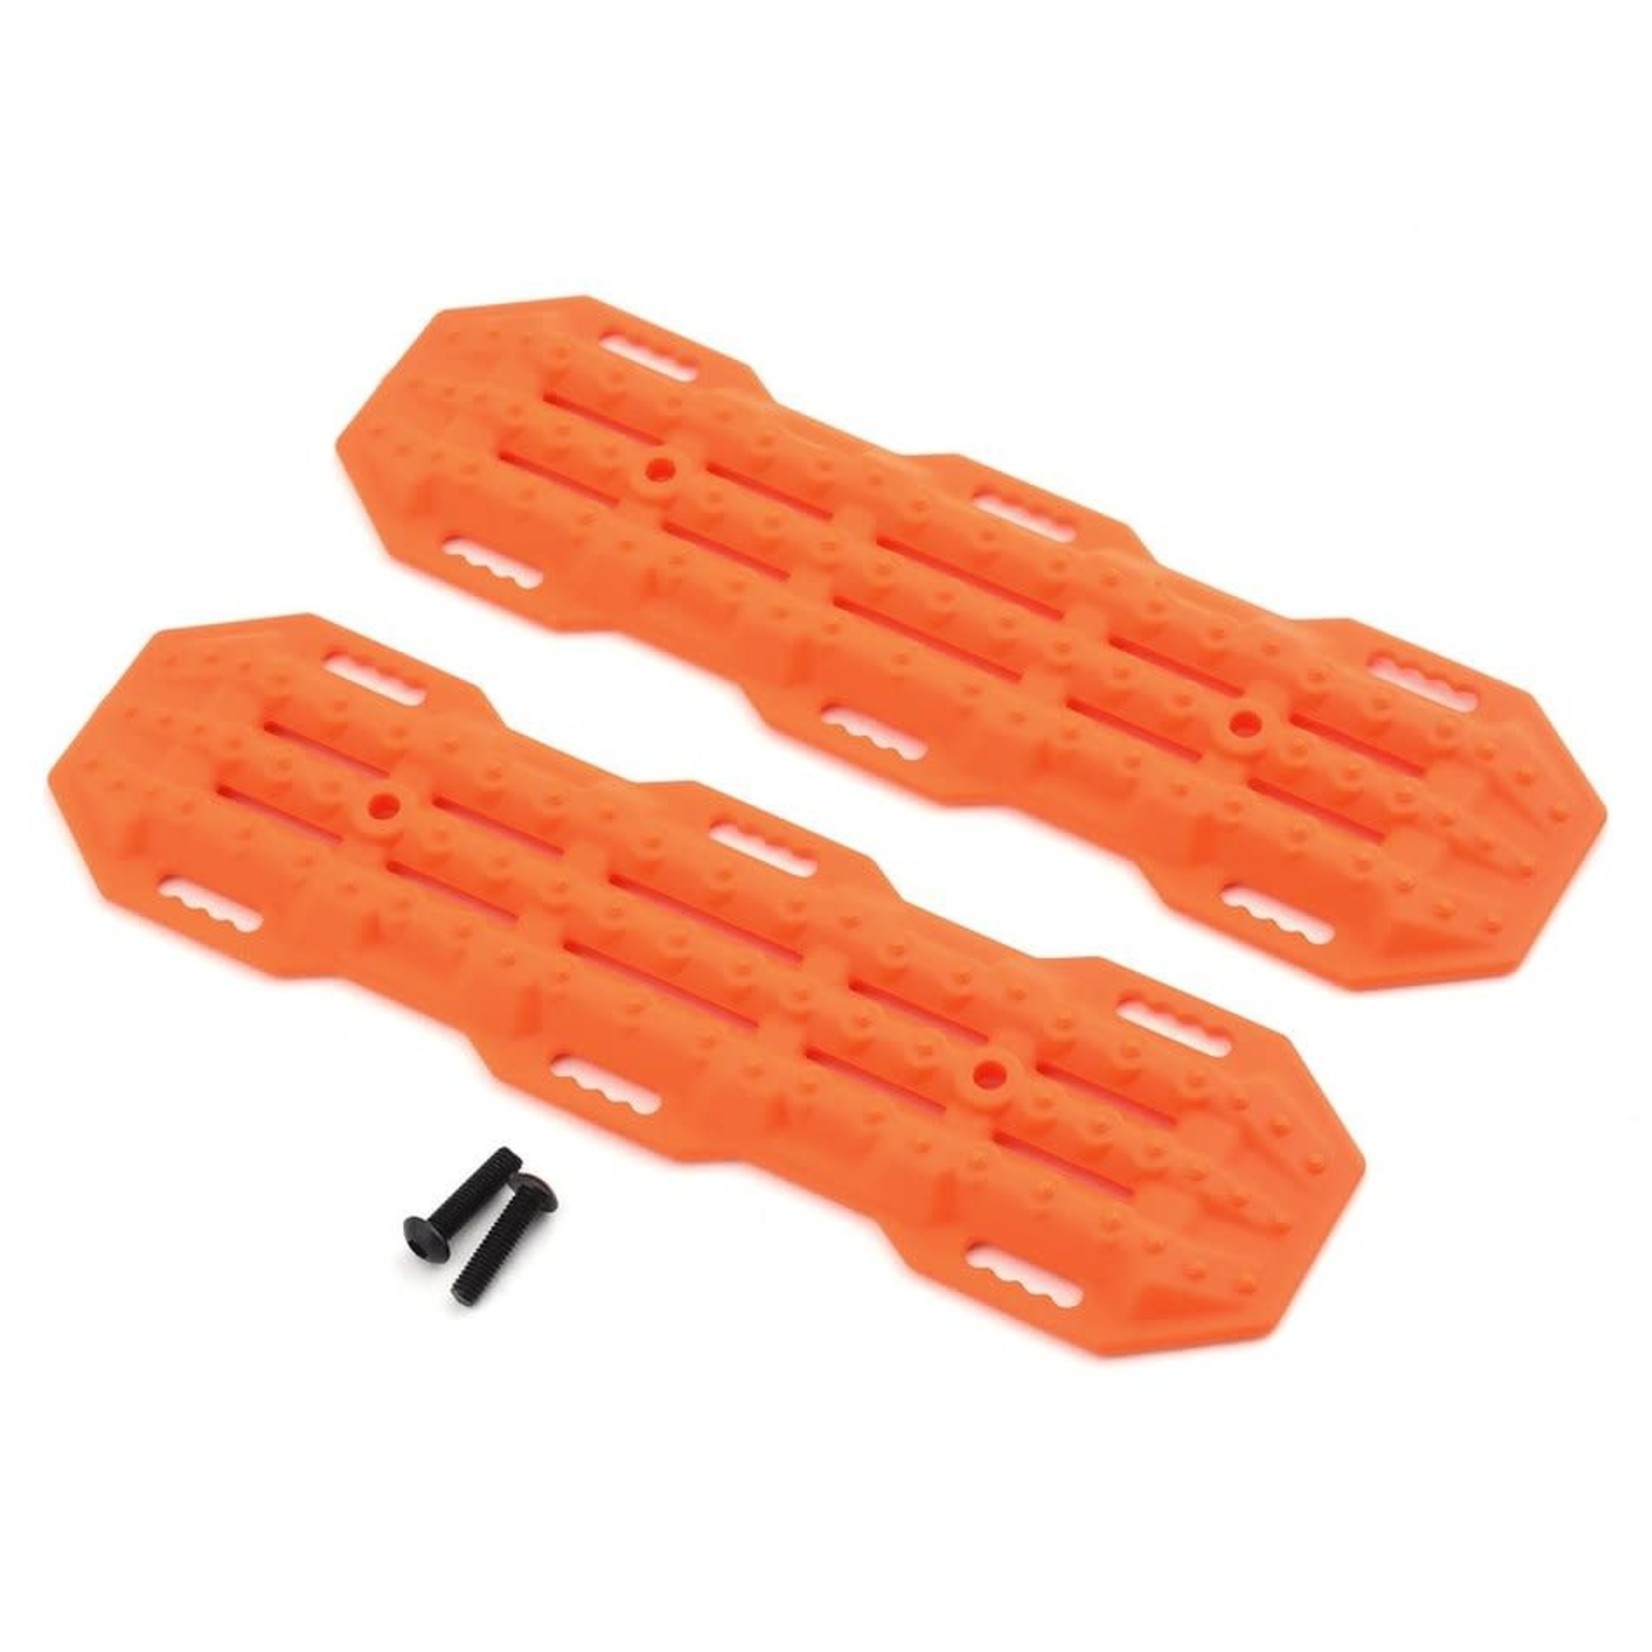 Traxxas Traxxas TRX-4 Traction Boards/Sand Ladders #8121